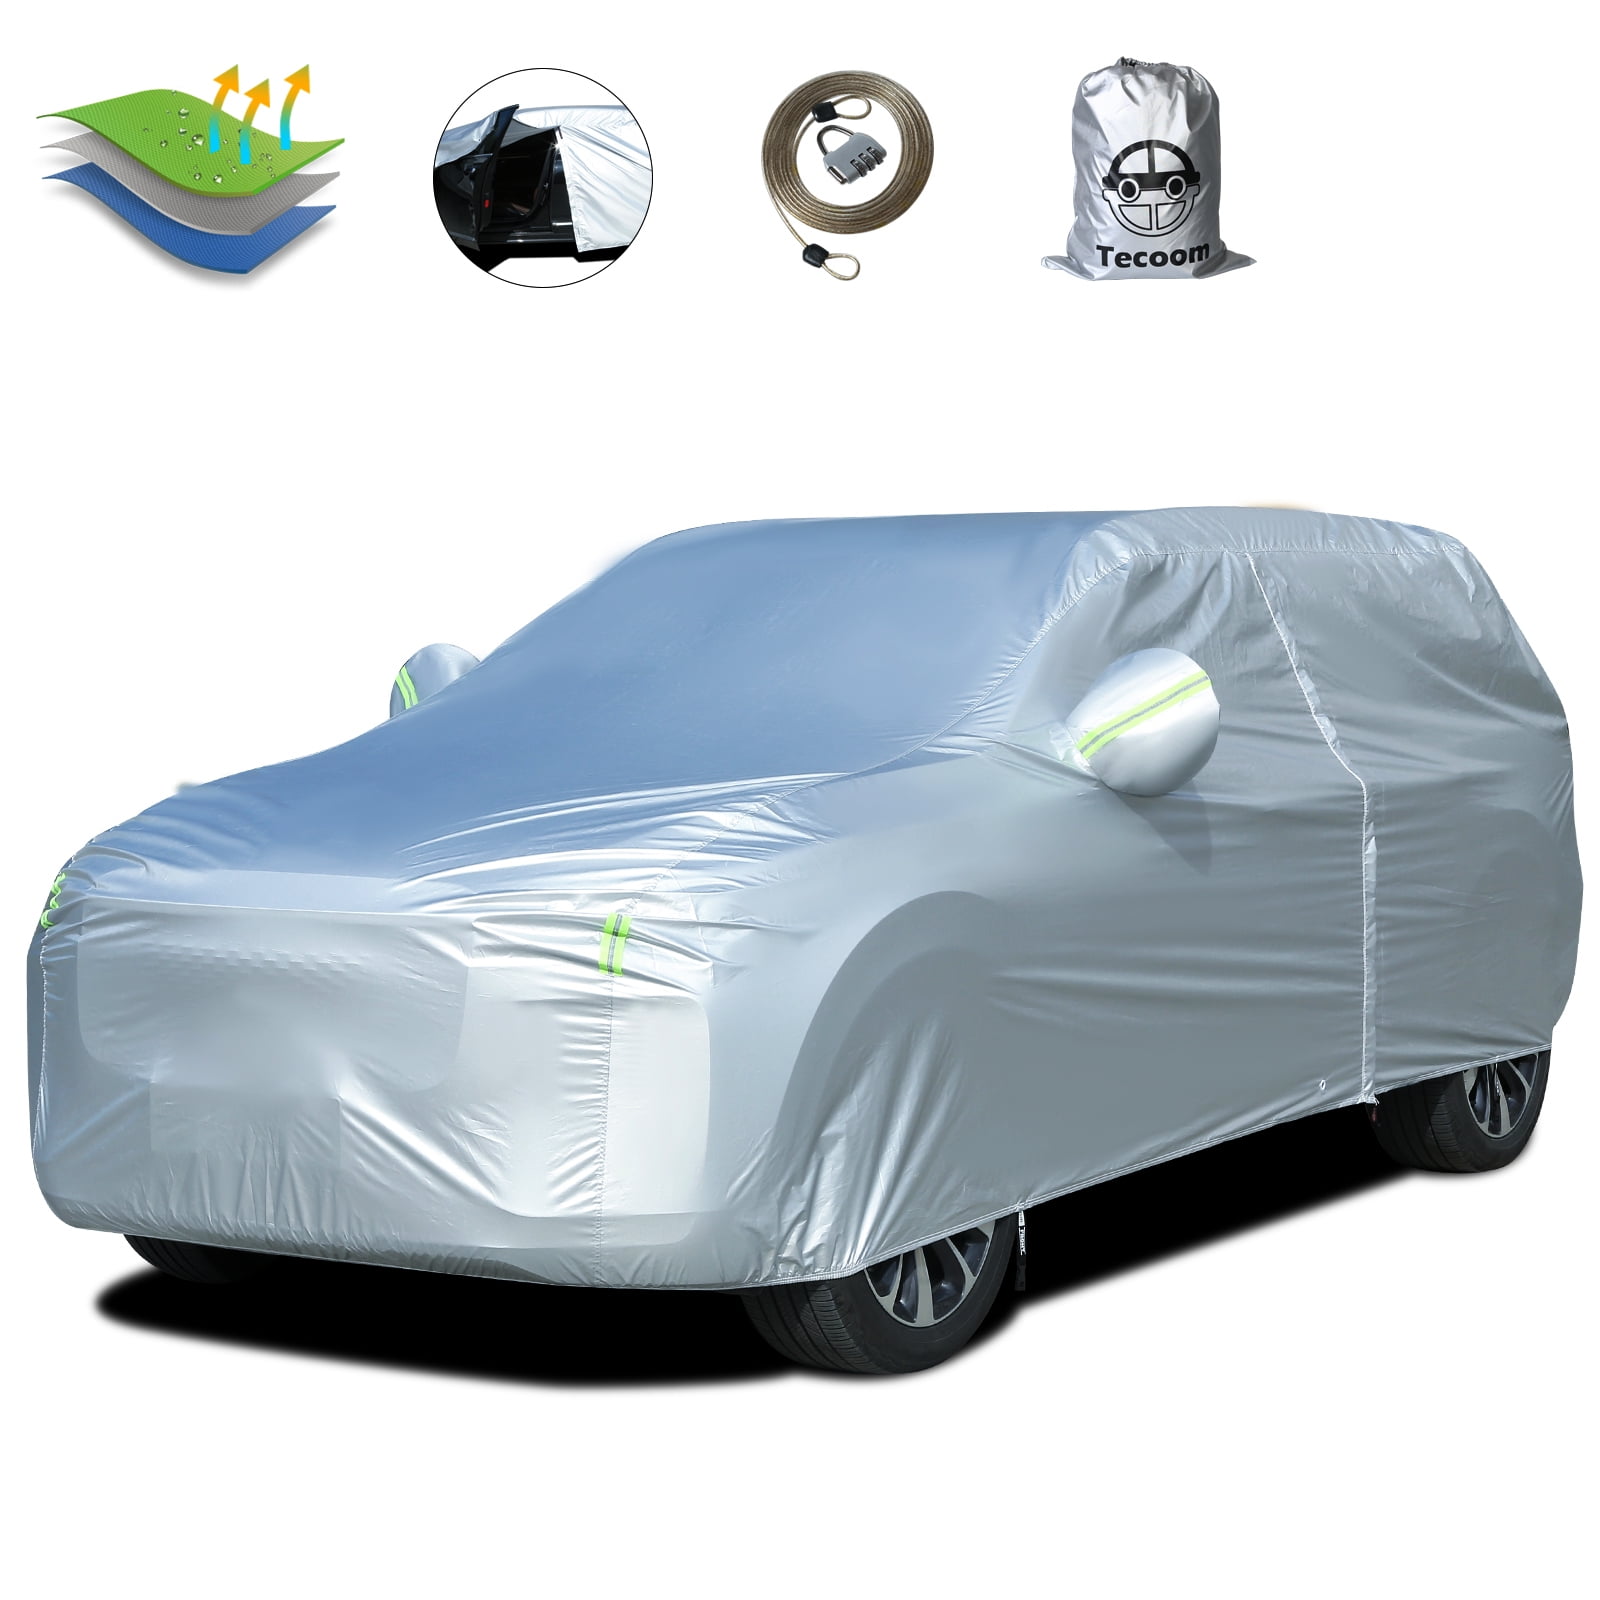 MEDIUM Heavy Duty Car Cover All Weather UV Protective Waterproof Cotton Lined 